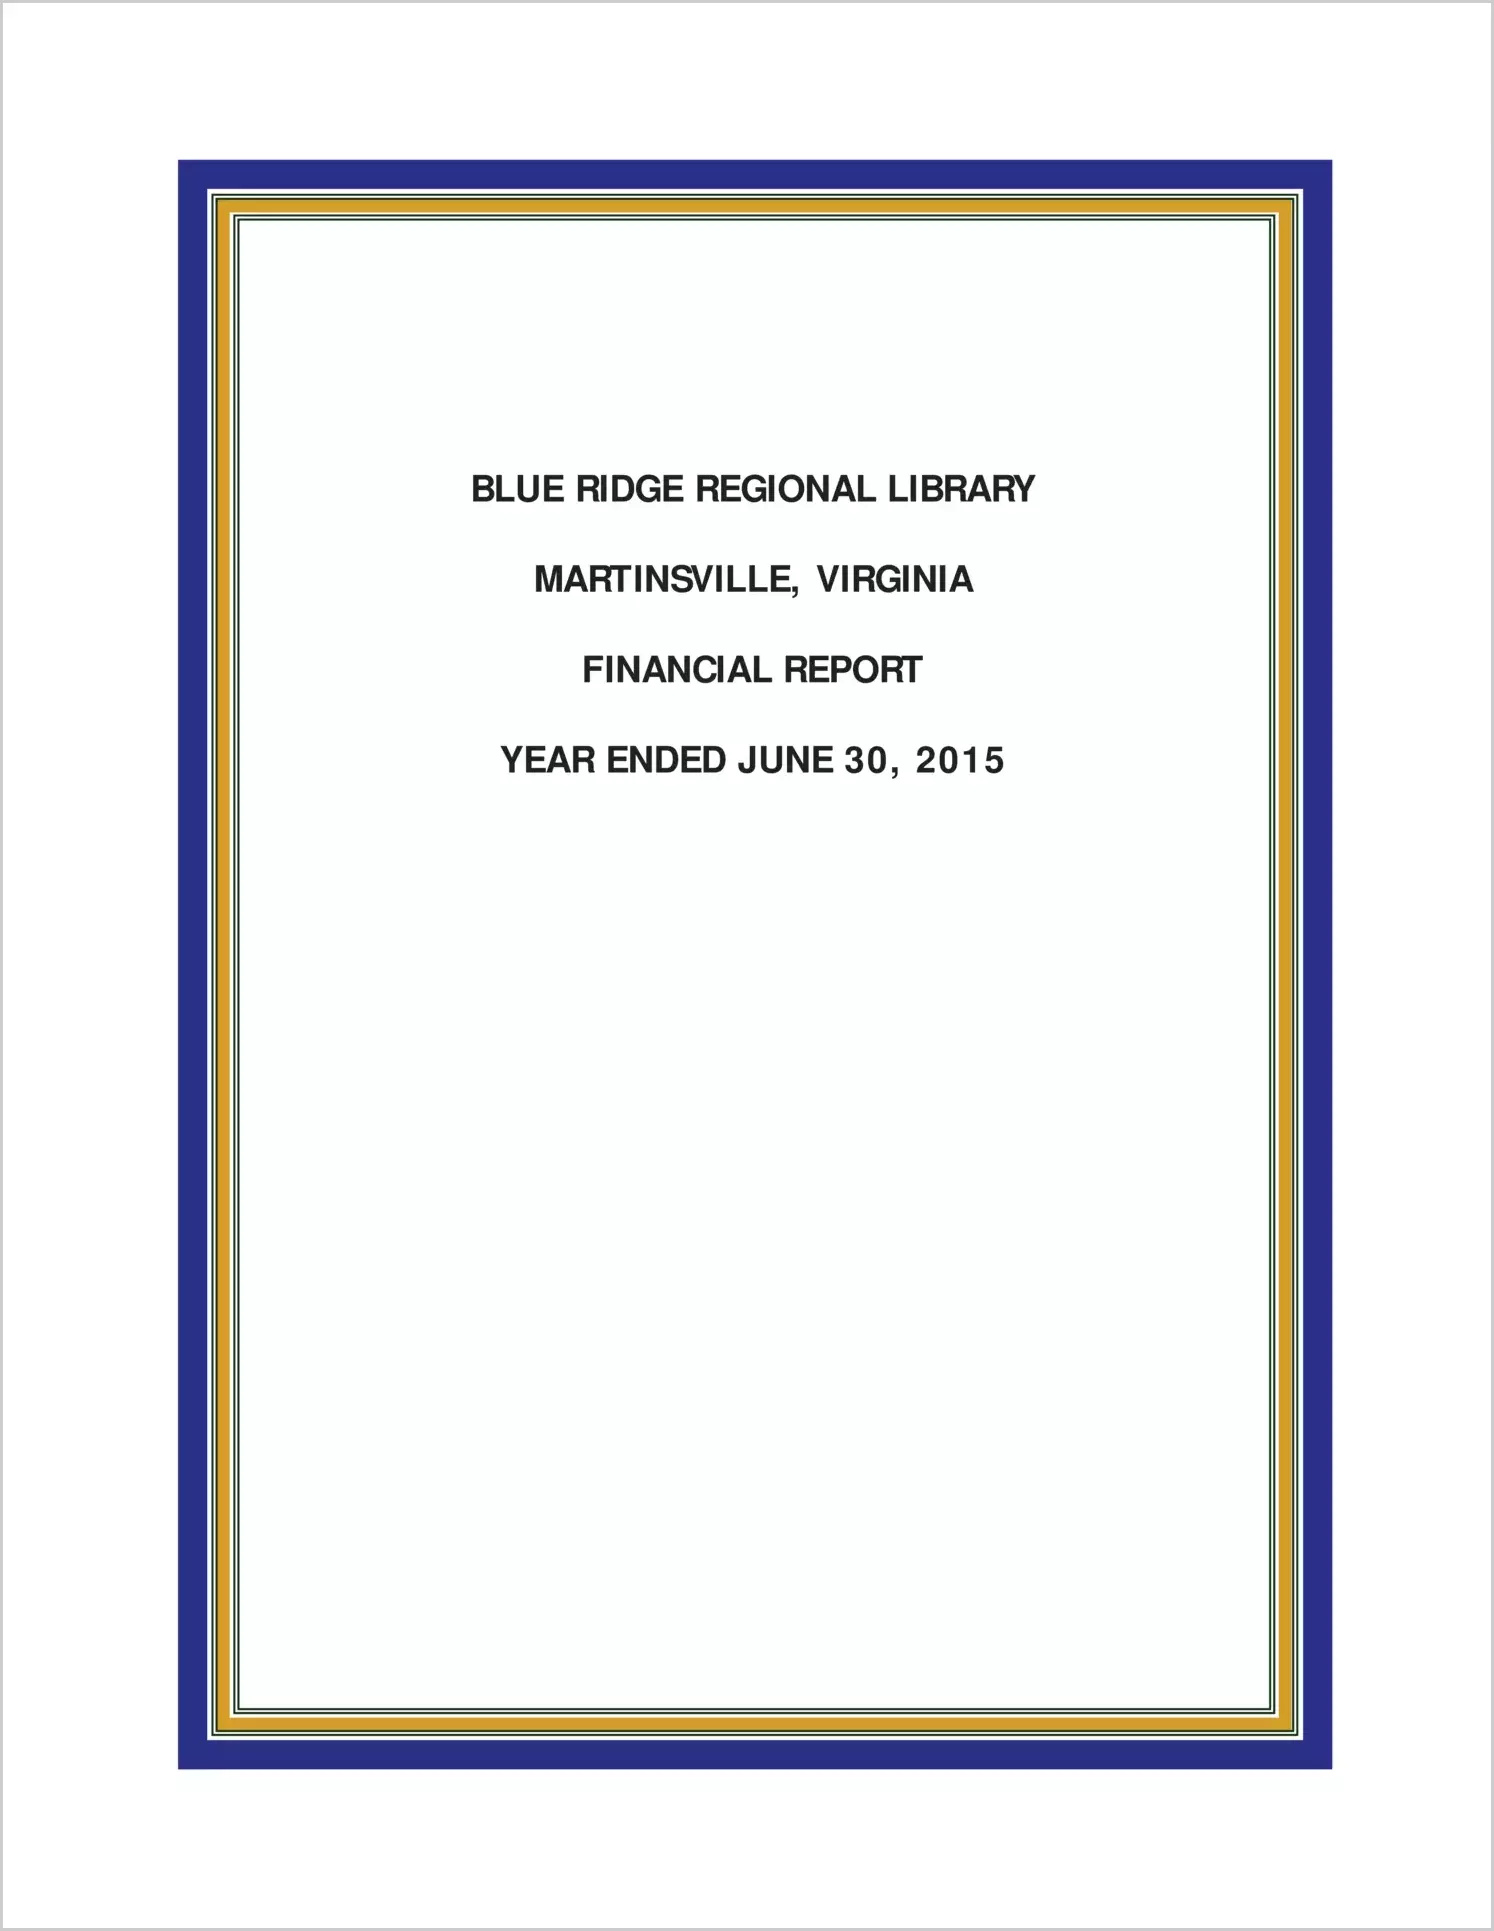 2015 ABC/Other Annual Financial Report  for Blue Ridge Regional Library